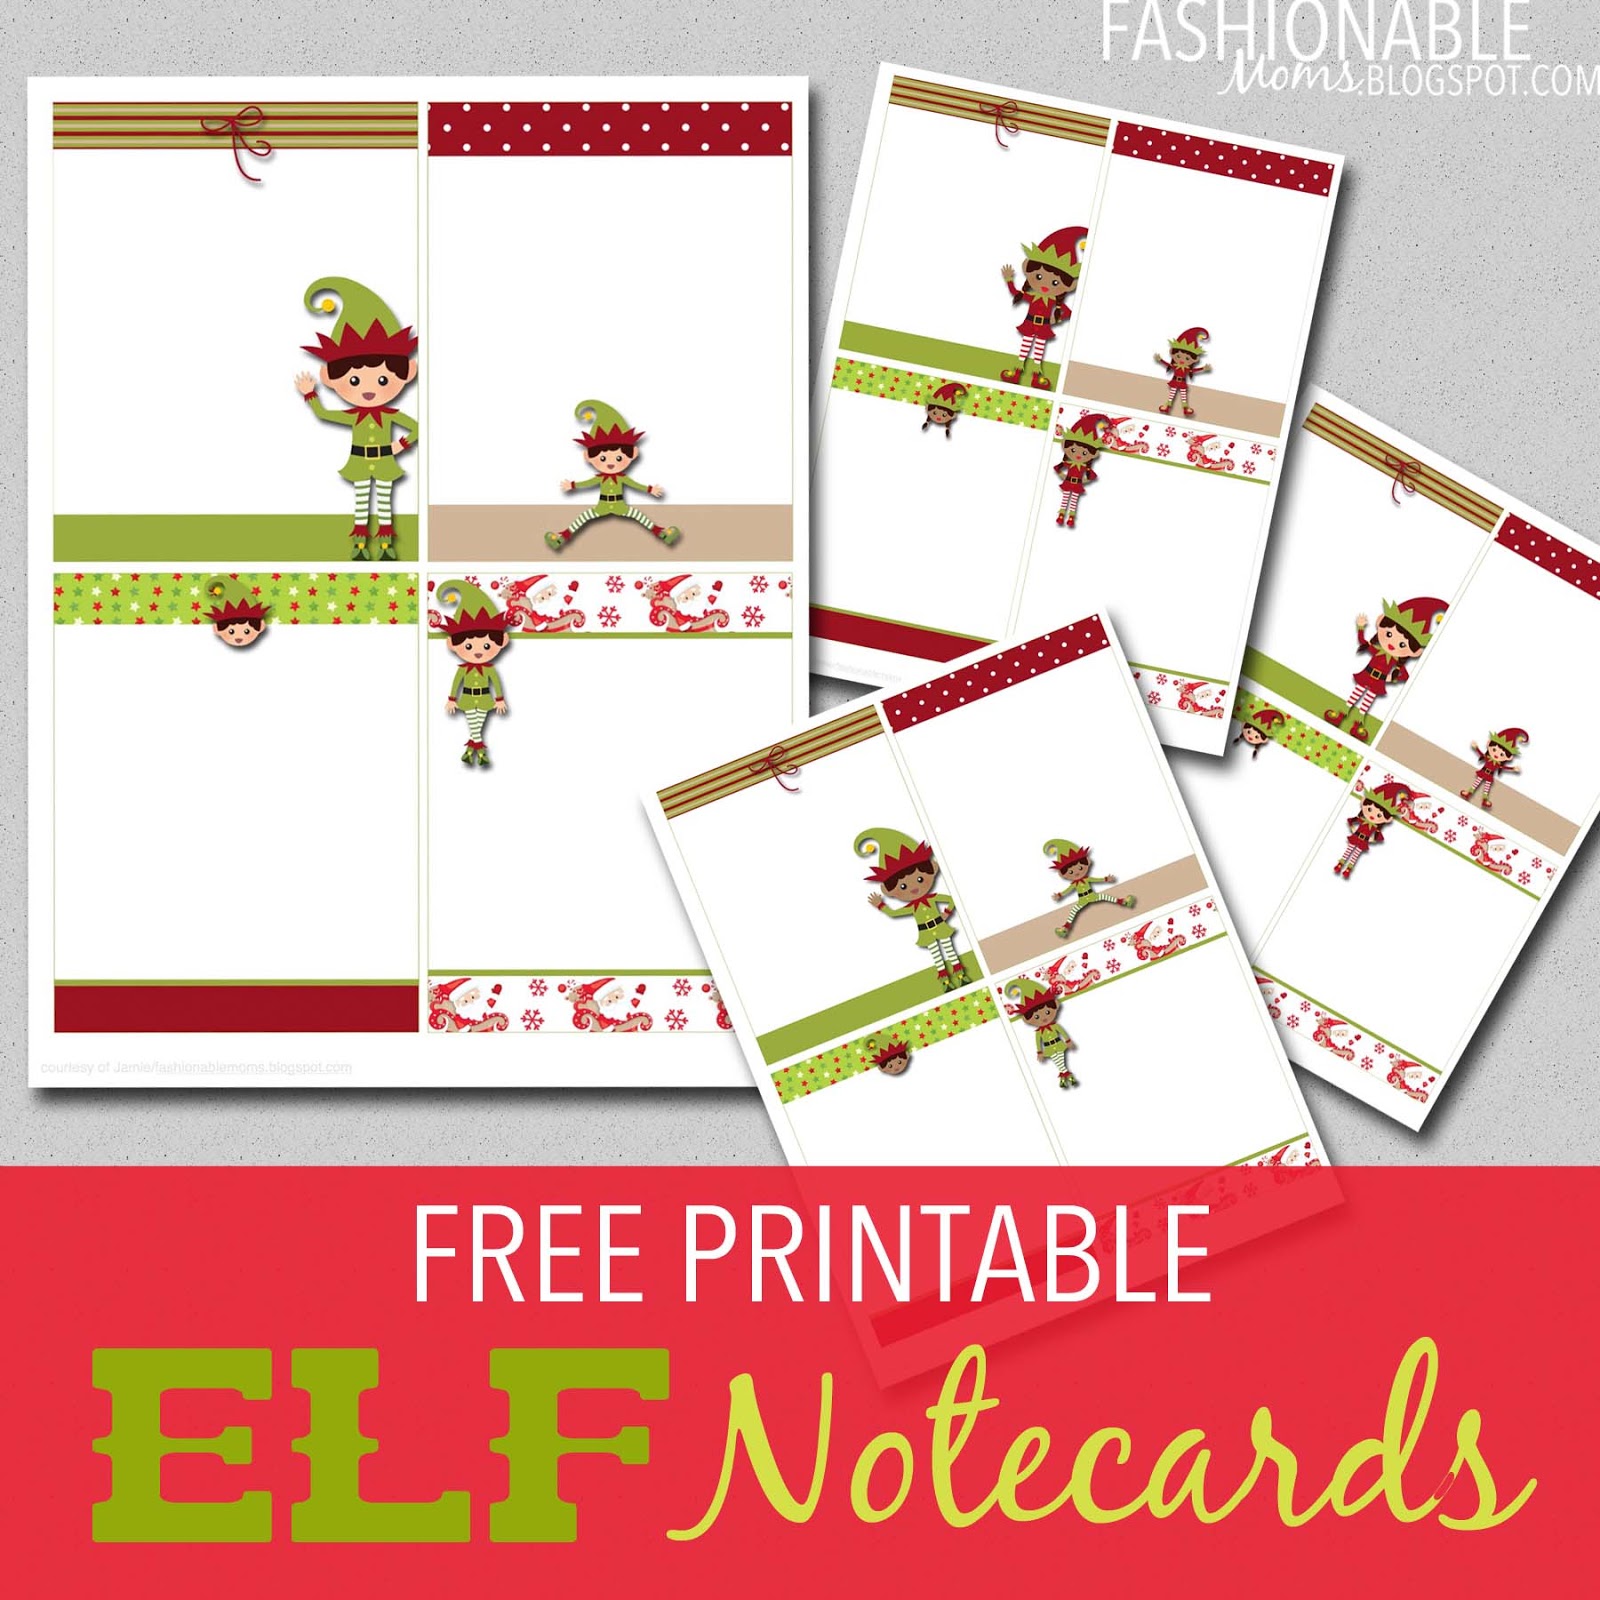 my-fashionable-designs-free-printable-elf-notecards